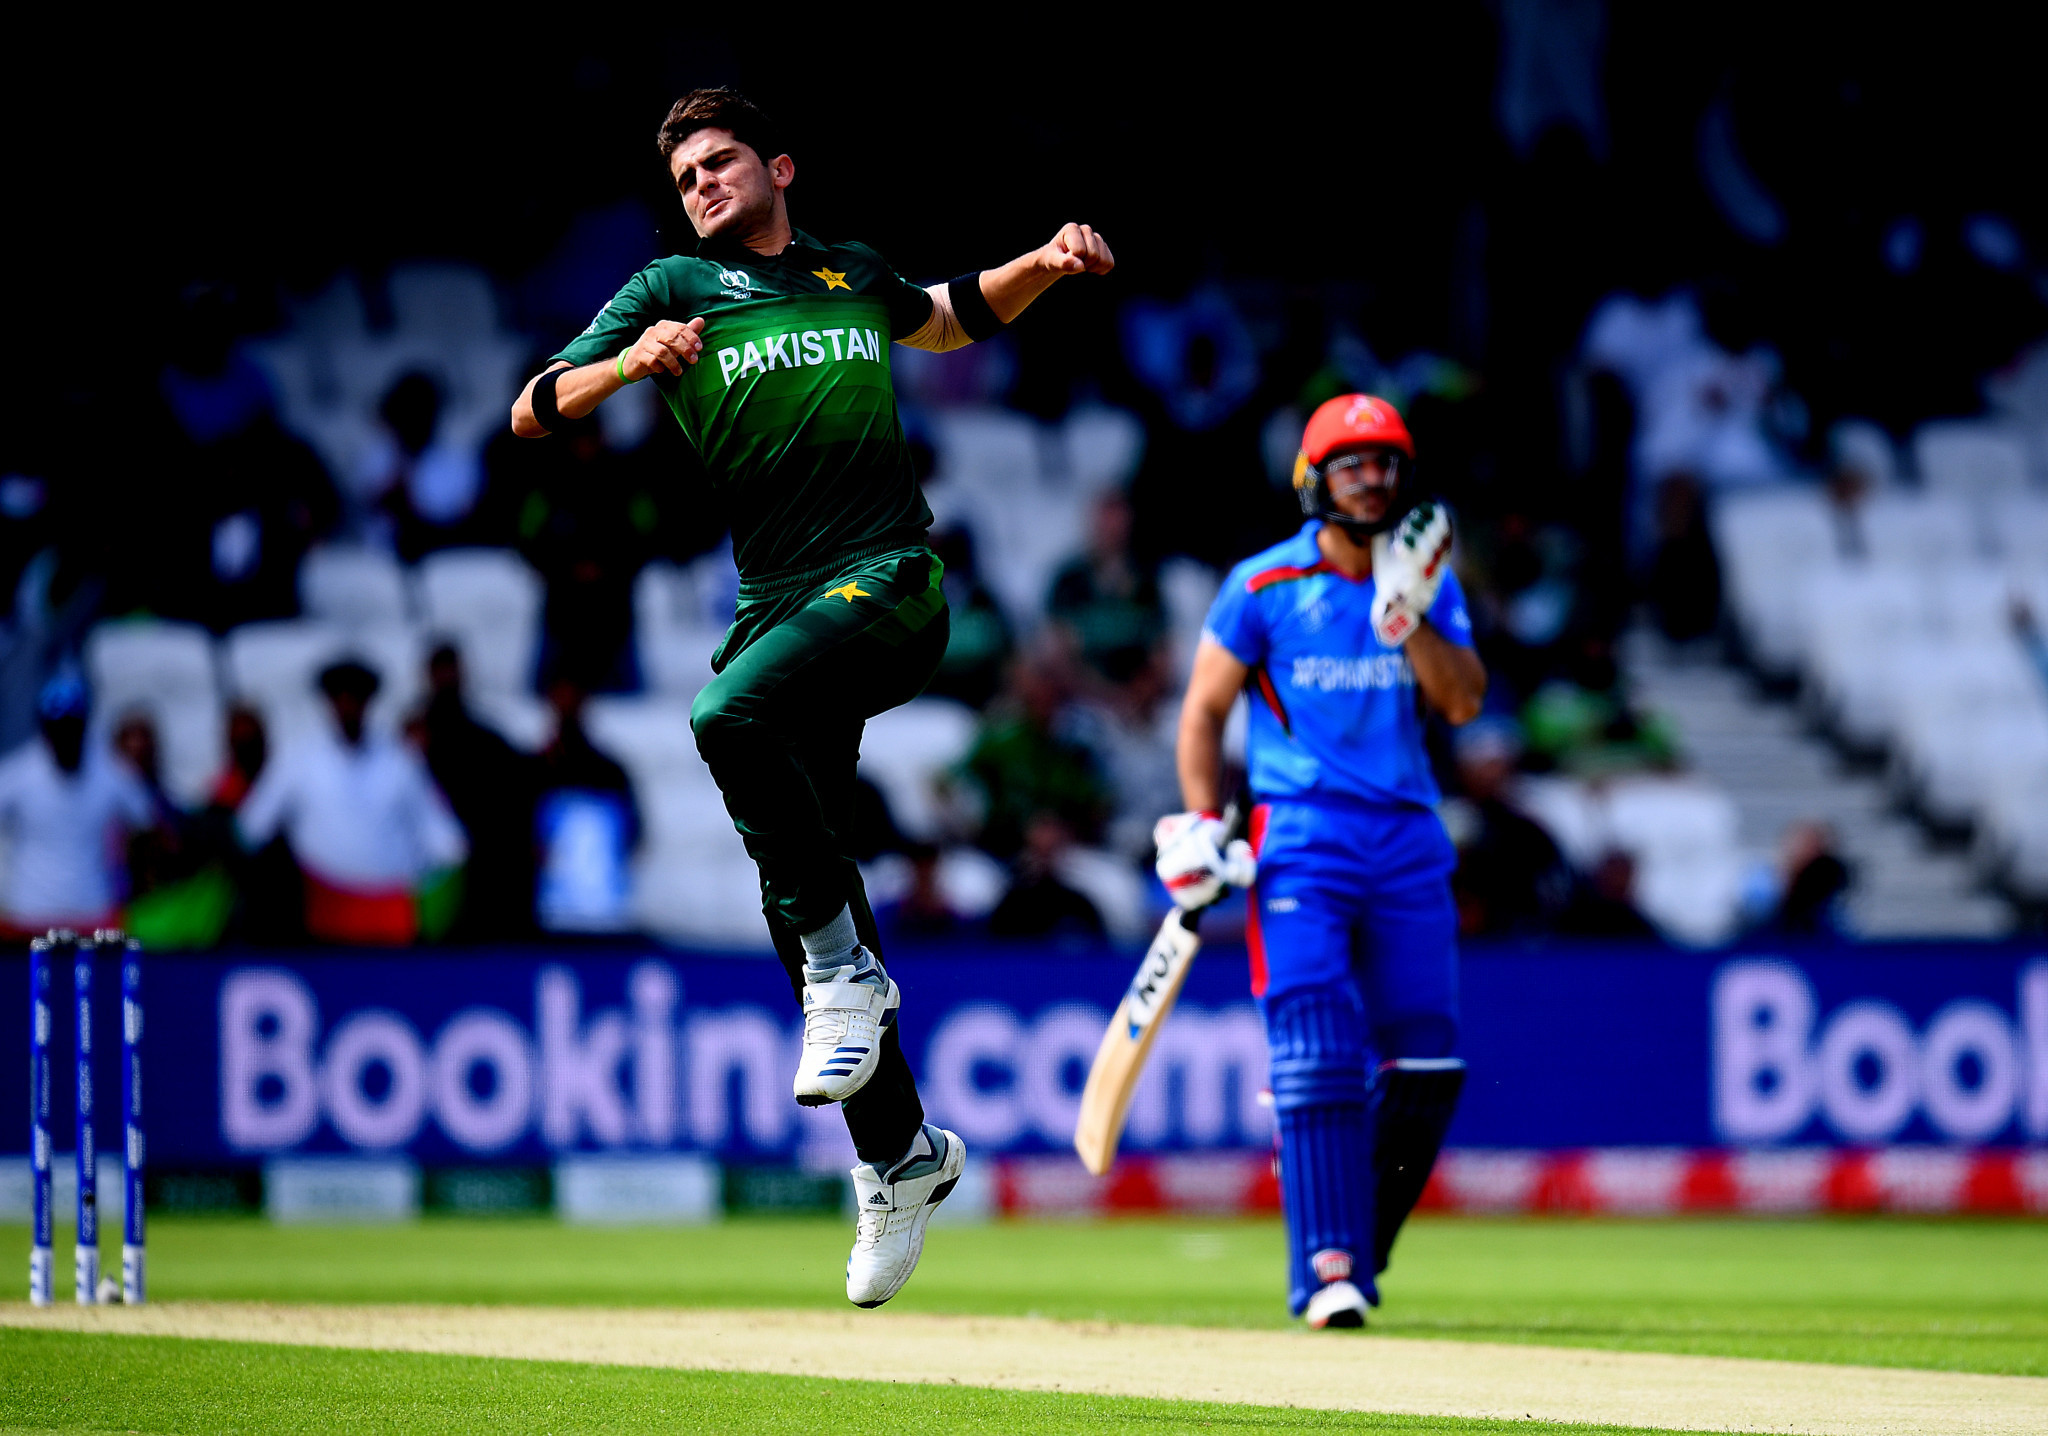 Shaheen Afridi was Pakistan's star bowler as he took four wickets to help restrict Afghanistan to a total of 227-9 ©Getty Images